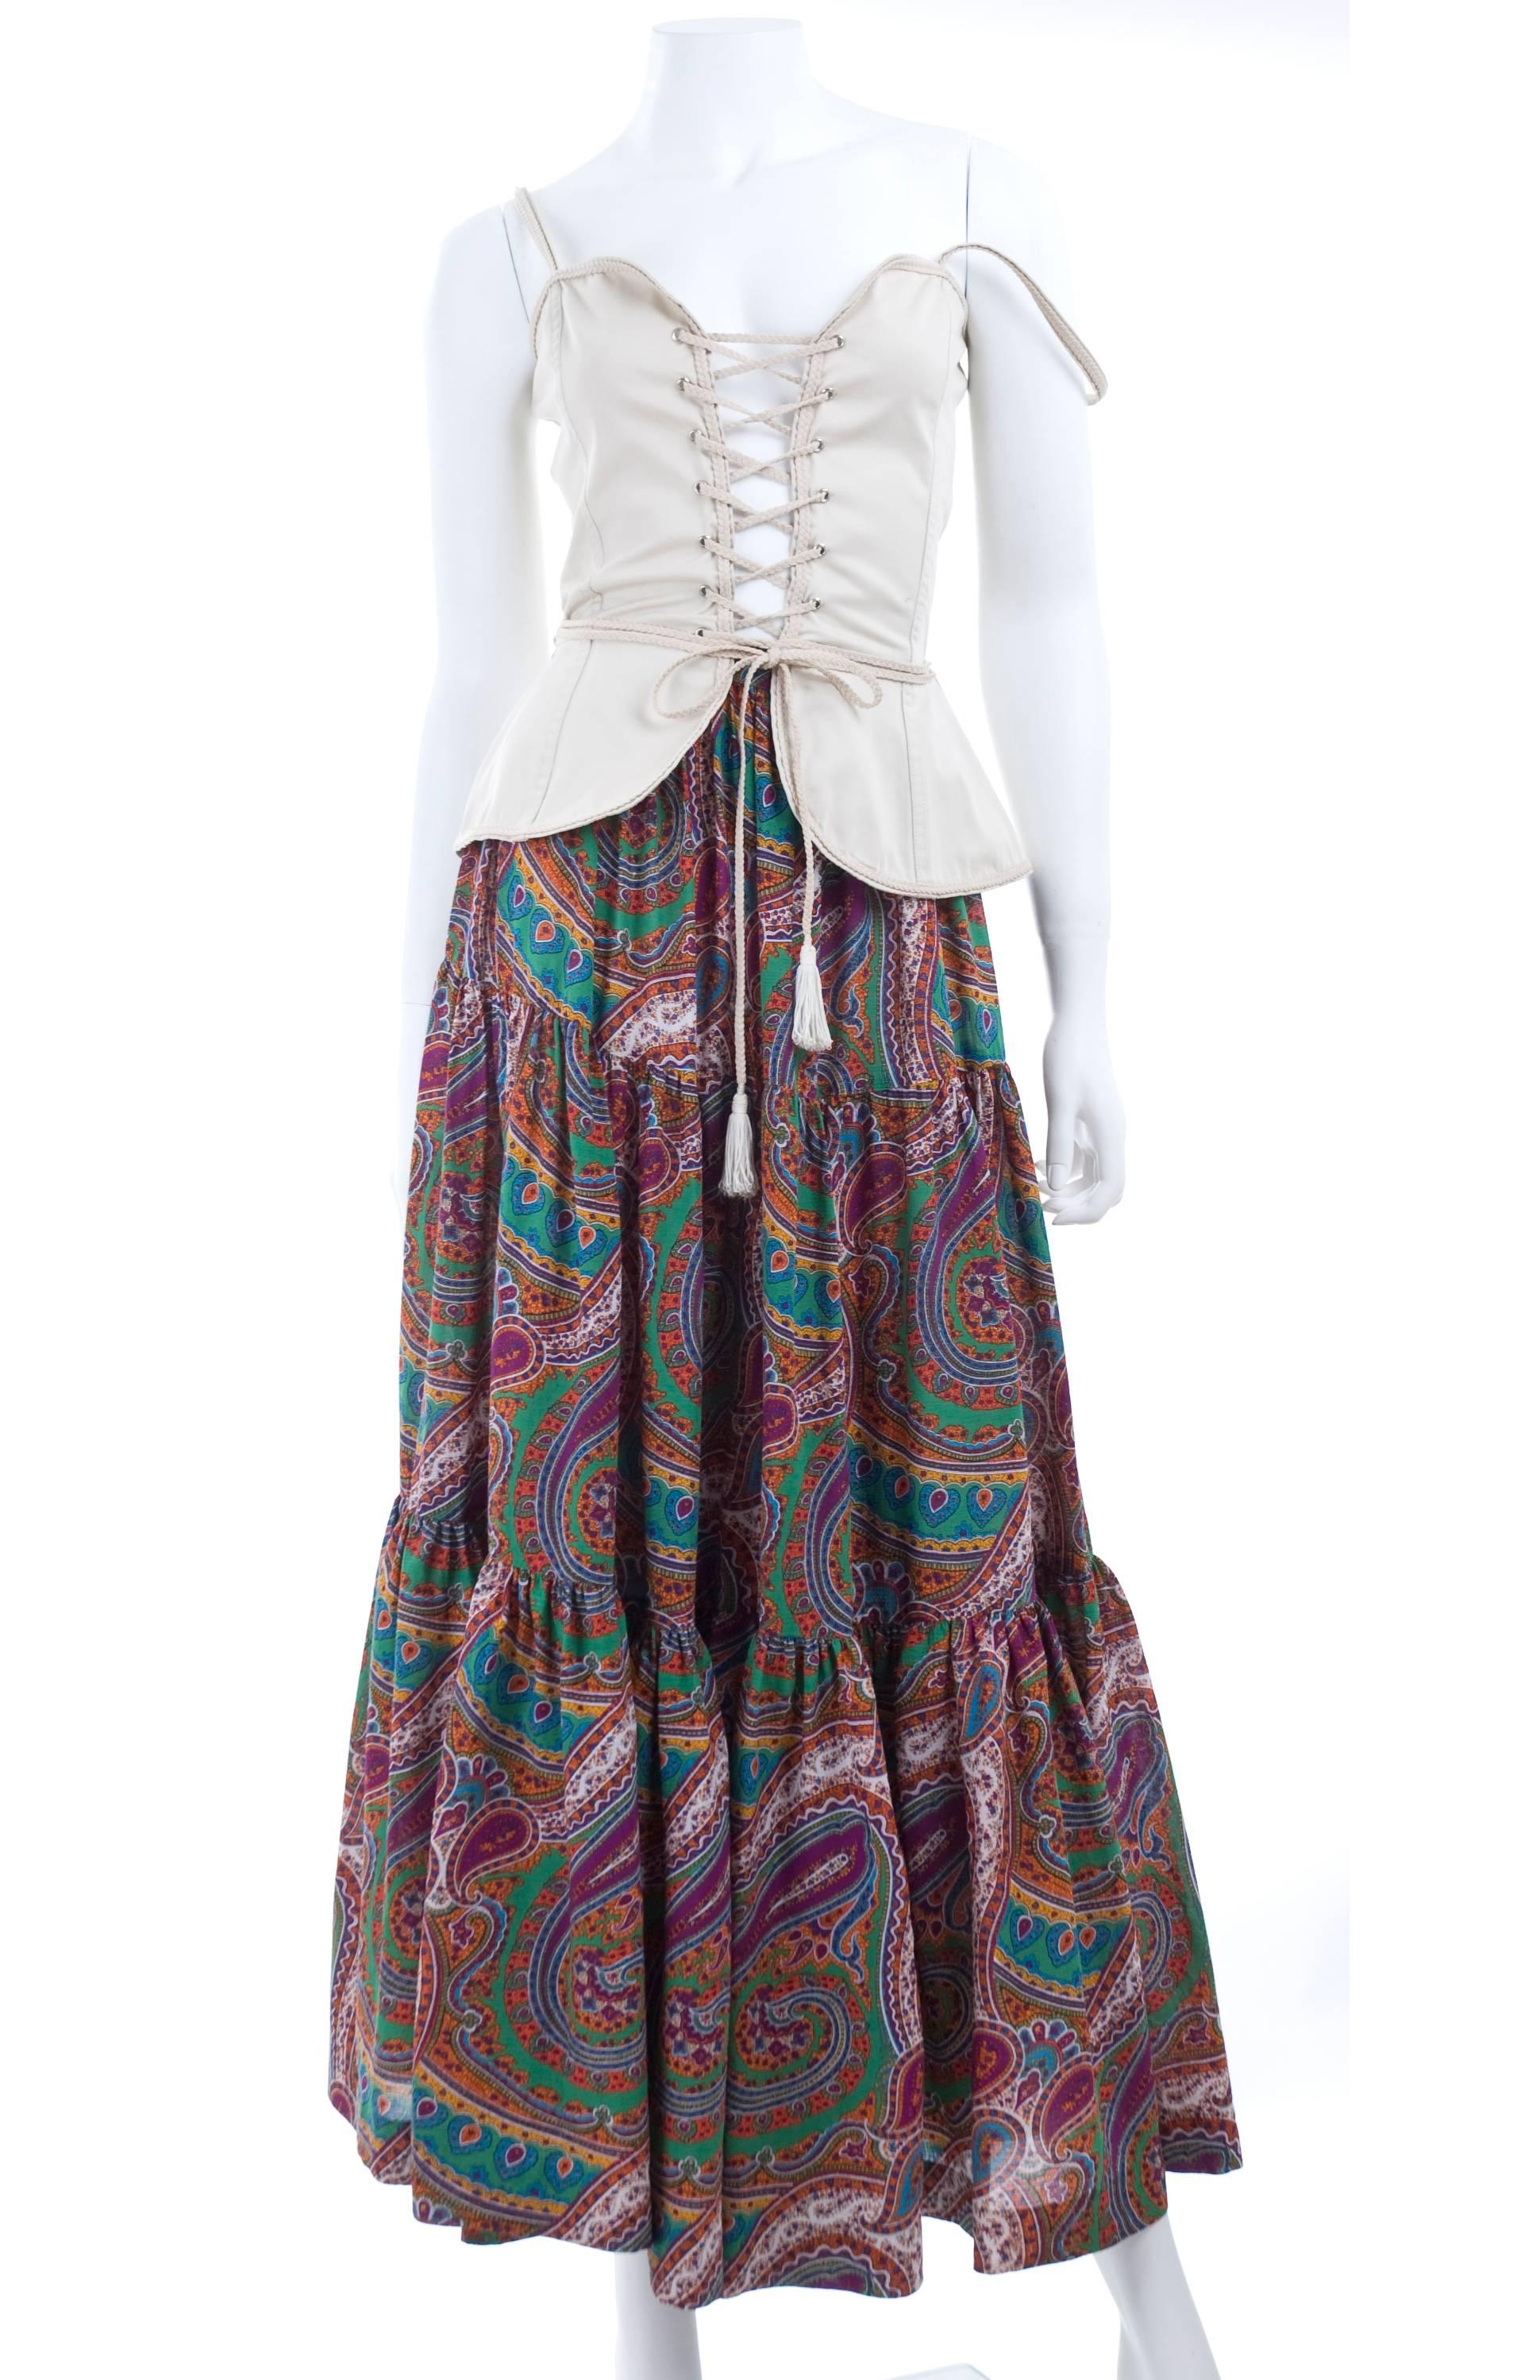 1970 Yves Saint Laurent gypsy skirt and corset top. The skirt in a colorful print and the bustier in creme.
Size 38 EU  
Measurements:
Skirt: length 39 - waist 26 inches
Bustier fits best for bust 34 inches